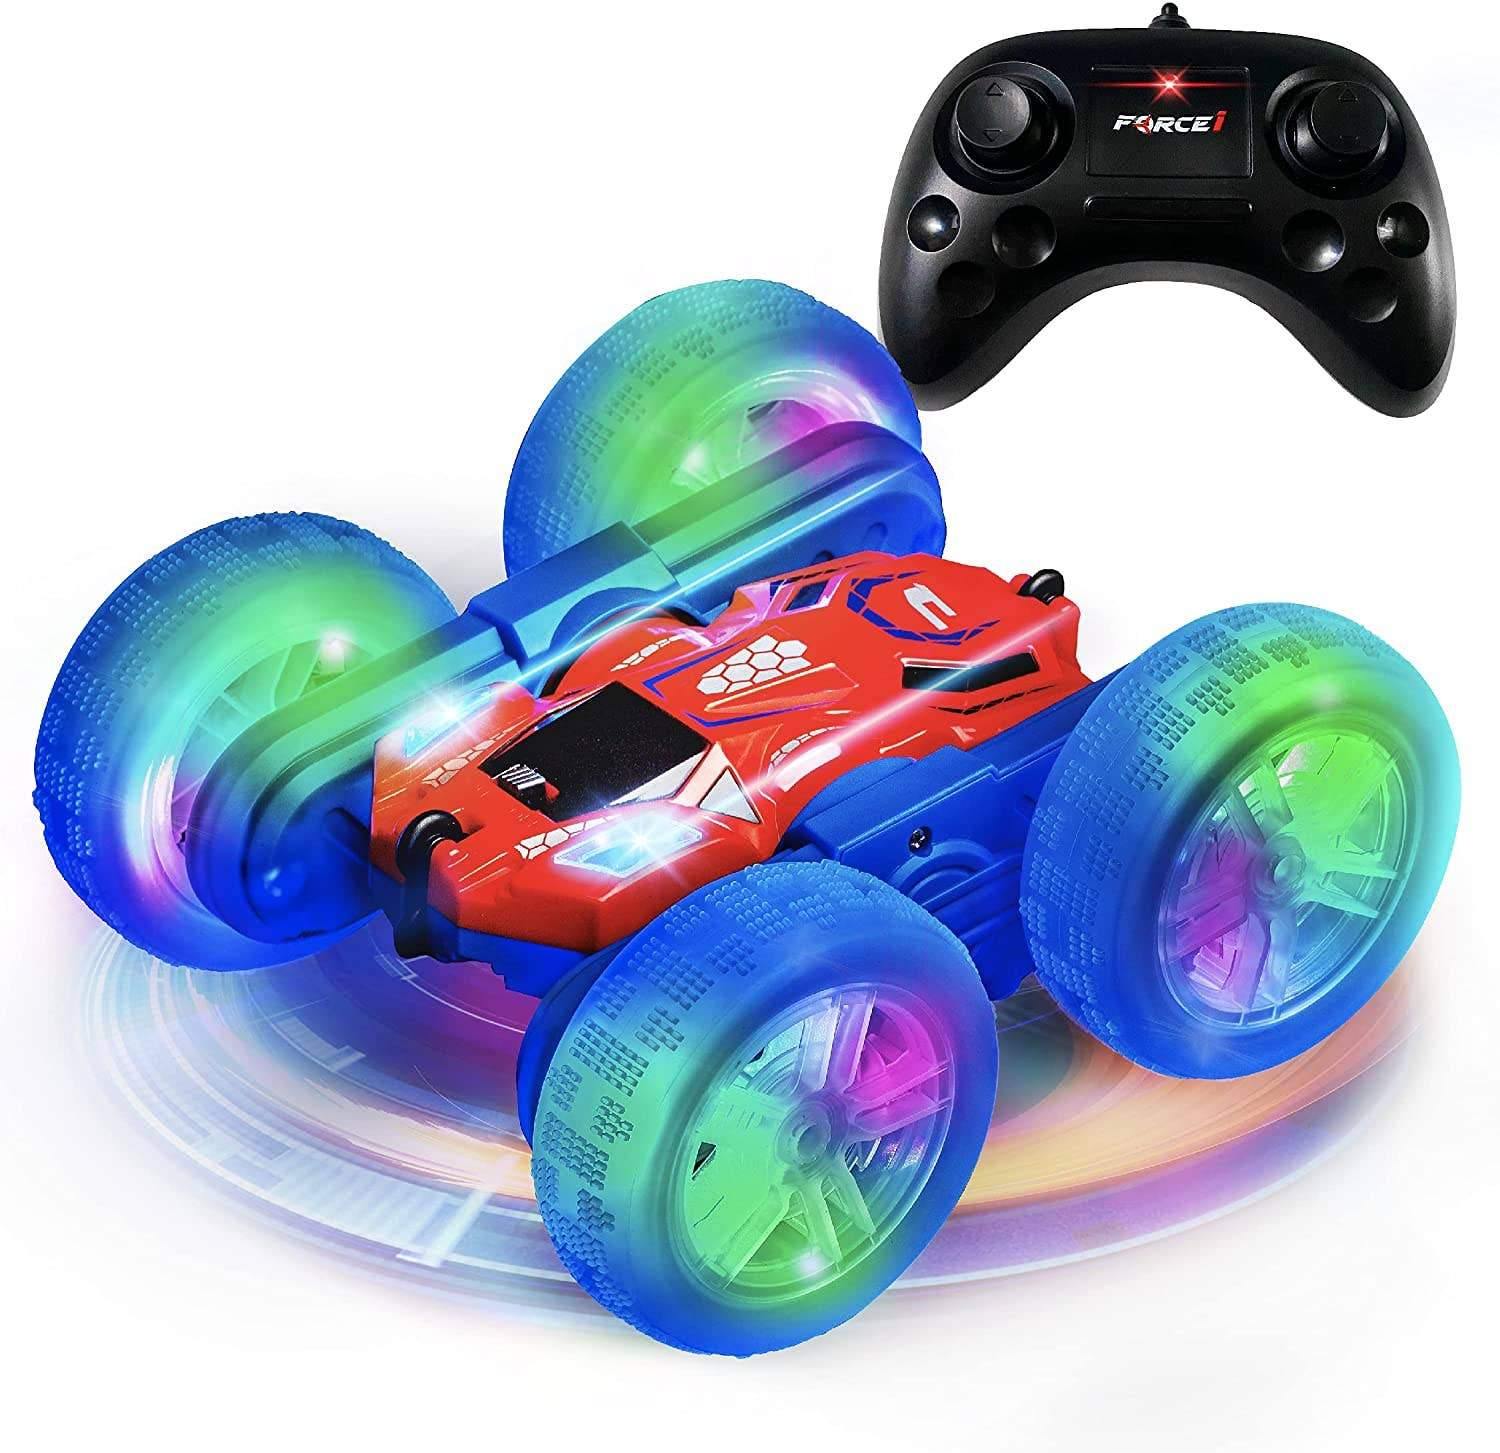 Force1 Cyclone RC Stunt Car with LED Tires, Remote Control, and Rechargeable Toy Car Battery - USA Toyz